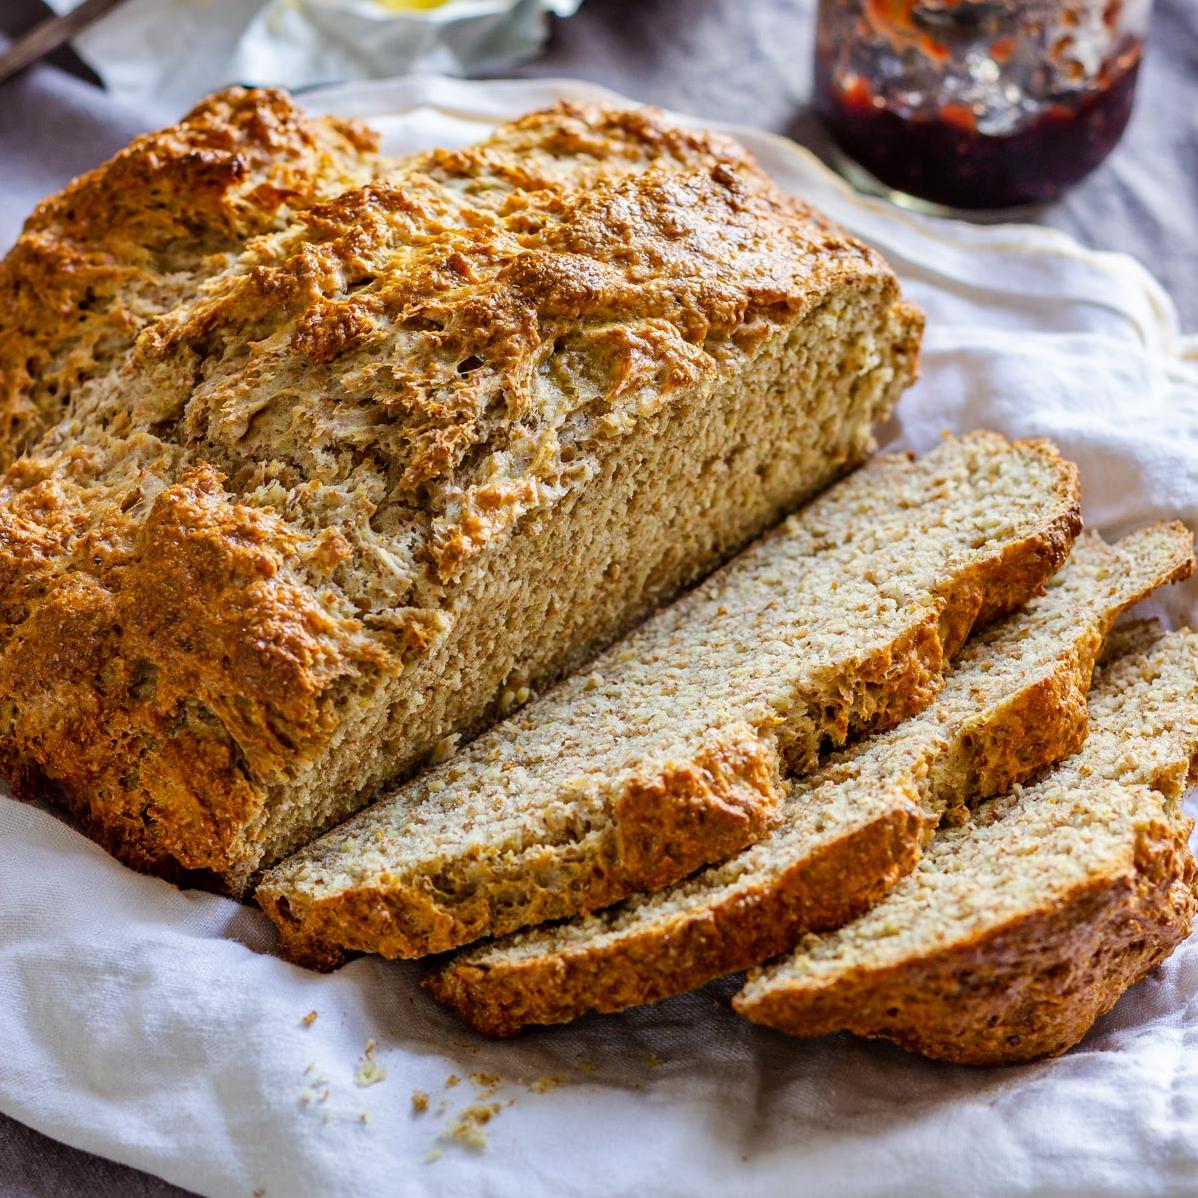  Slices of this bread, spread with sweet butter, make for the ultimate comfort snack.